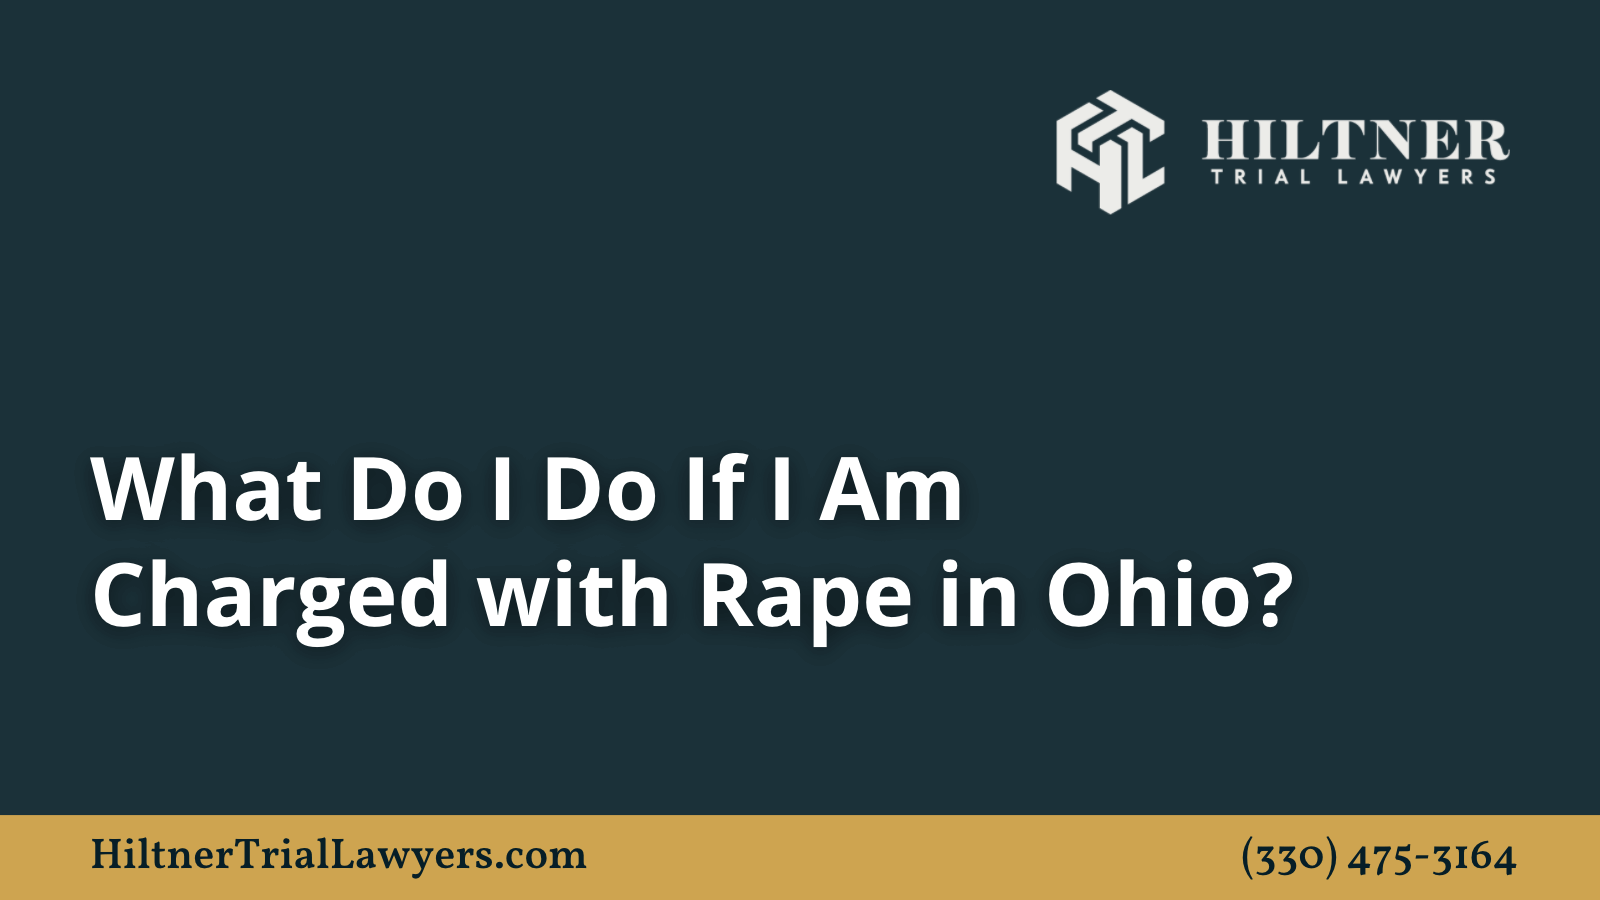 What Do I Do If I Am Charged with Rape in Ohio - Hiltner Trial Lawyers Ohio - max hiltner